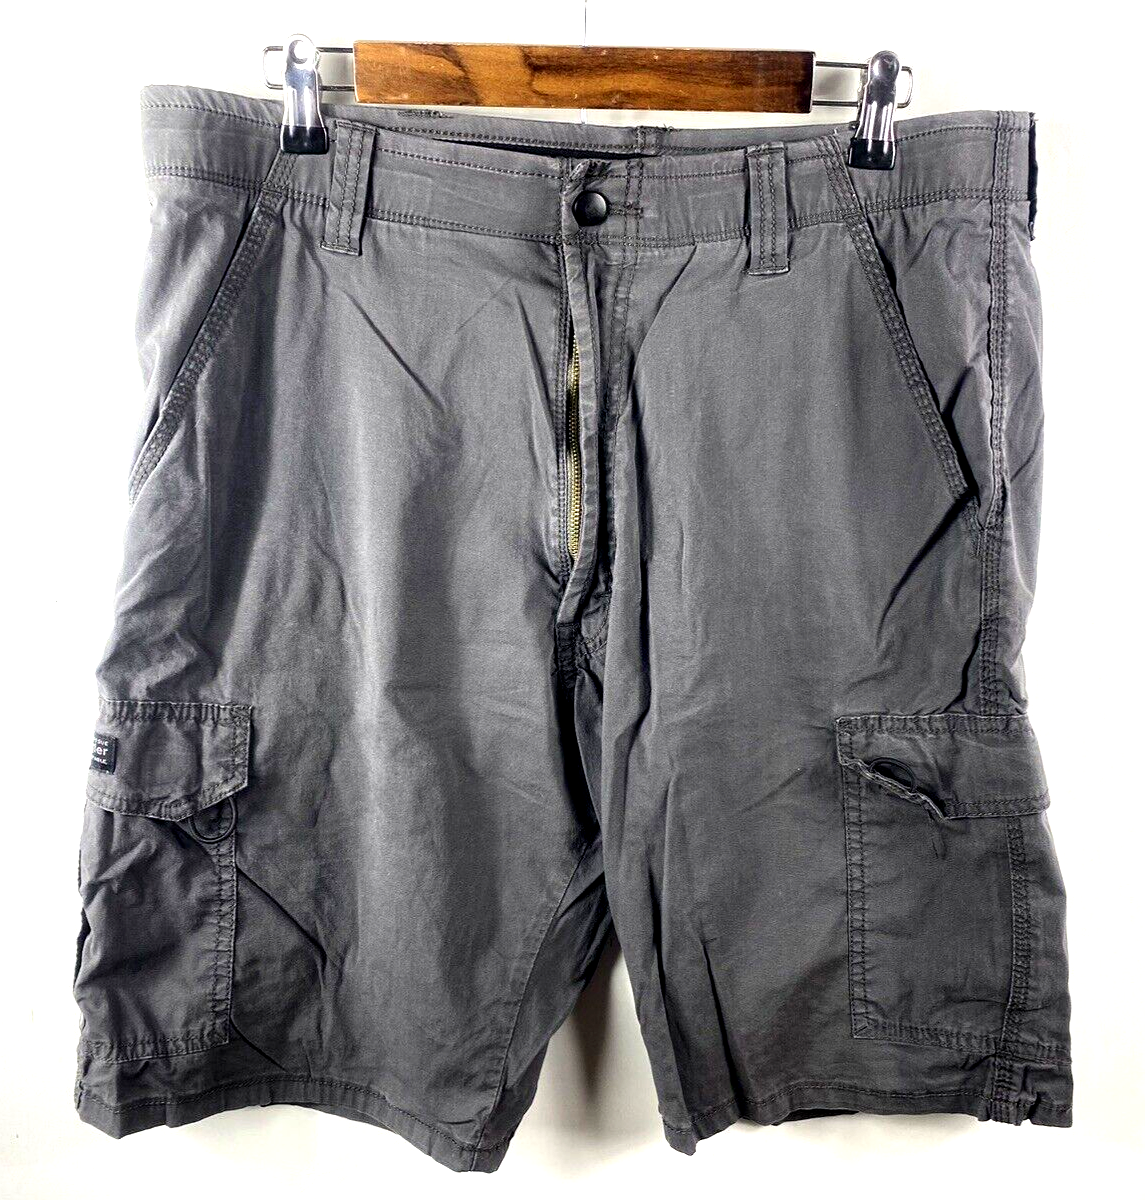 Primary image for Wrangler Cargo Shorts Size 34 Mens Gray Performance Series Pockets Stretch Waist